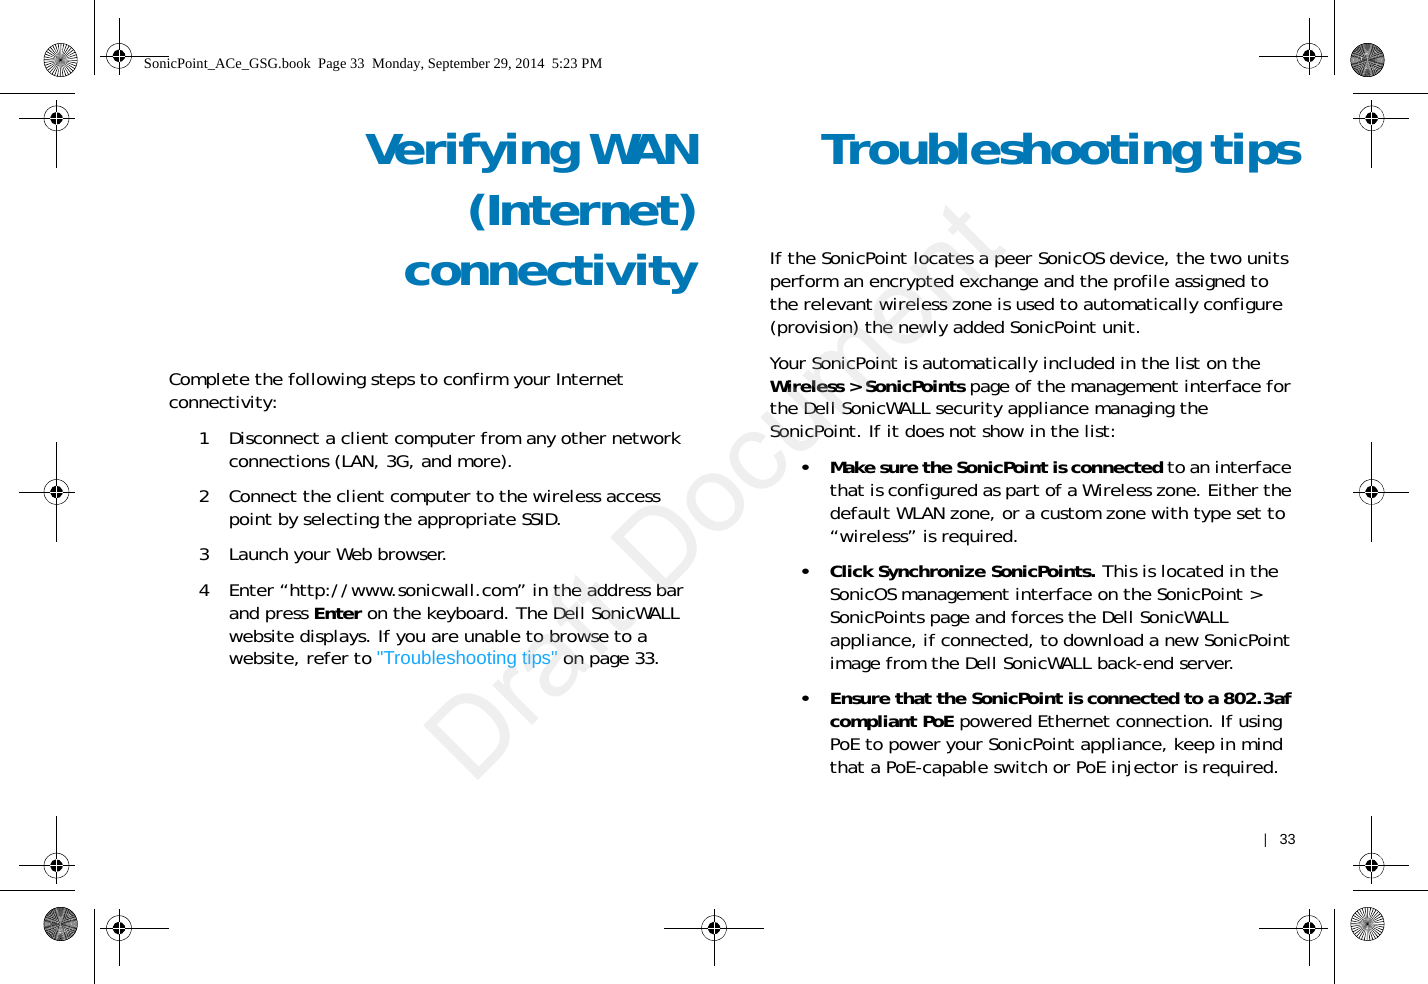    |   33Verifying WAN(Internet)connectivityComplete the following steps to confirm your Internet connectivity:1 Disconnect a client computer from any other network connections (LAN, 3G, and more). 2 Connect the client computer to the wireless access point by selecting the appropriate SSID.3 Launch your Web browser.4 Enter “http://www.sonicwall.com” in the address bar and press Enter on the keyboard. The Dell SonicWALL website displays. If you are unable to browse to a website, refer to &quot;Troubleshooting tips&quot; on page 33. Troubleshooting tipsIf the SonicPoint locates a peer SonicOS device, the two units perform an encrypted exchange and the profile assigned to the relevant wireless zone is used to automatically configure (provision) the newly added SonicPoint unit. Your SonicPoint is automatically included in the list on the Wireless &gt; SonicPoints page of the management interface for the Dell SonicWALL security appliance managing the SonicPoint. If it does not show in the list: • Make sure the SonicPoint is connected to an interface that is configured as part of a Wireless zone. Either the default WLAN zone, or a custom zone with type set to “wireless” is required.• Click Synchronize SonicPoints. This is located in the SonicOS management interface on the SonicPoint &gt; SonicPoints page and forces the Dell SonicWALL appliance, if connected, to download a new SonicPoint image from the Dell SonicWALL back-end server.• Ensure that the SonicPoint is connected to a 802.3af compliant PoE powered Ethernet connection. If using PoE to power your SonicPoint appliance, keep in mind that a PoE-capable switch or PoE injector is required.SonicPoint_ACe_GSG.book  Page 33  Monday, September 29, 2014  5:23 PMDraft Document